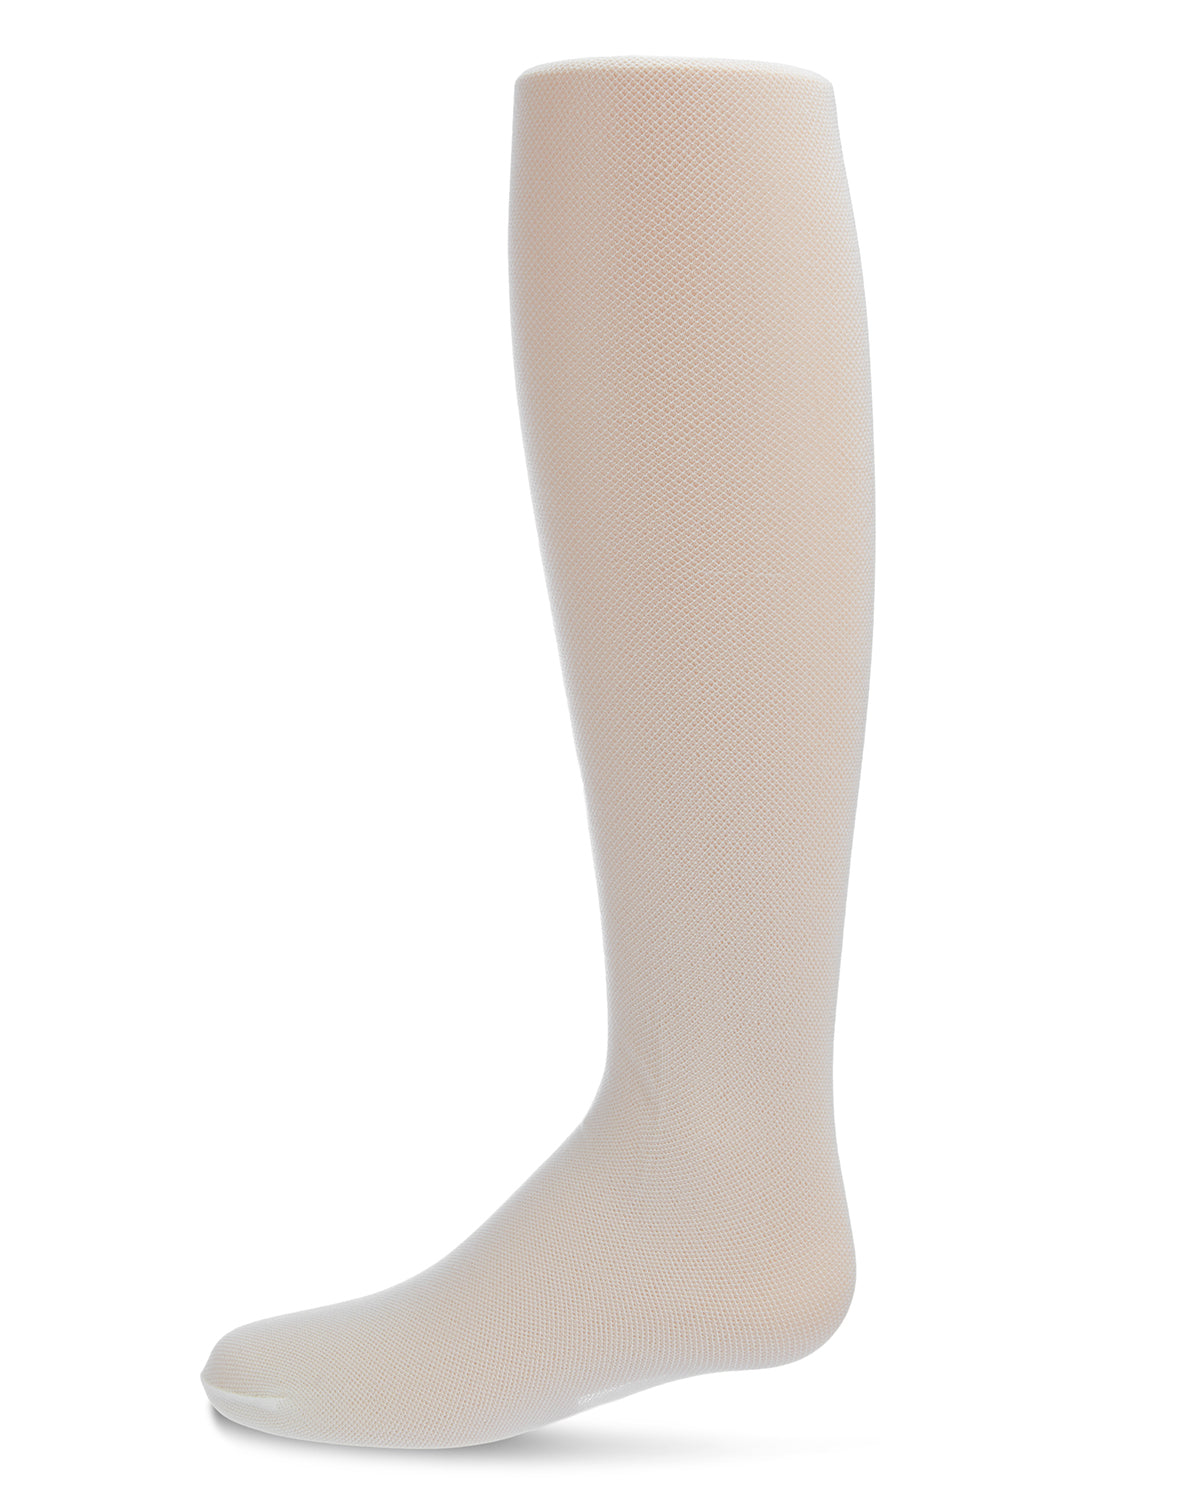 Micronet Soft & Breathable Girls' Tights